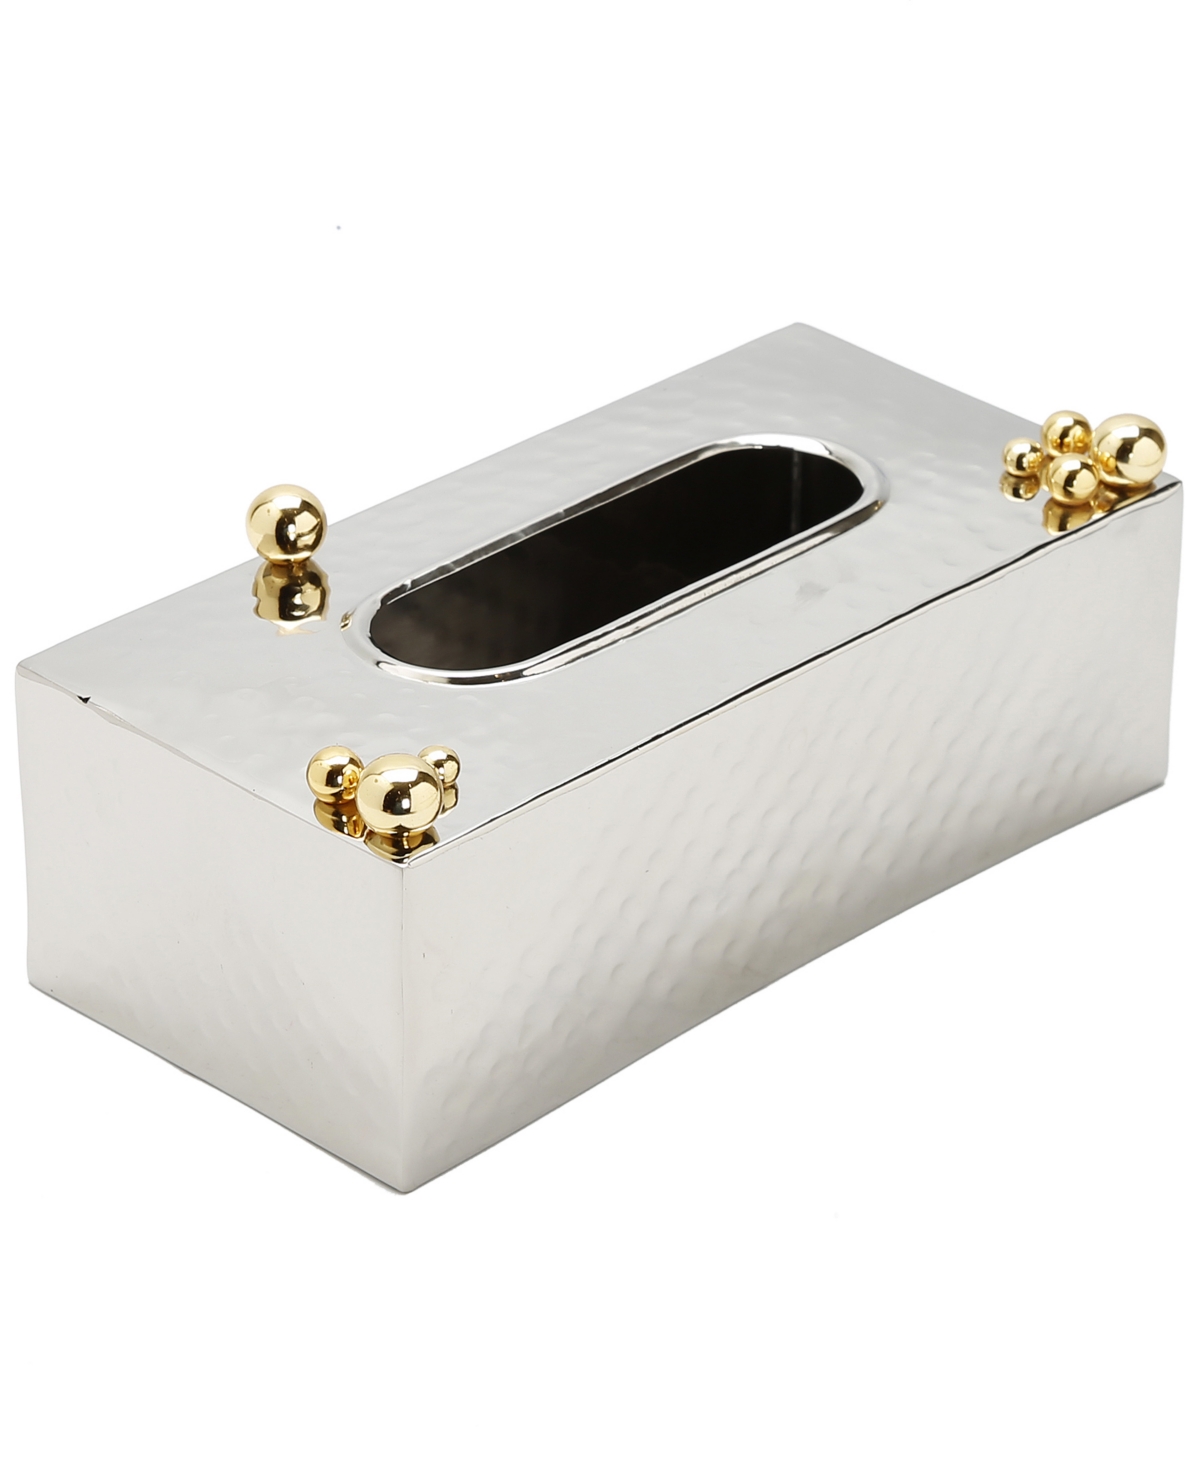 Classic Touch Hammered Stainless Steel Tissue Box Ball Design On Top, 11" X 5" In Silver-tone And Gold-tone